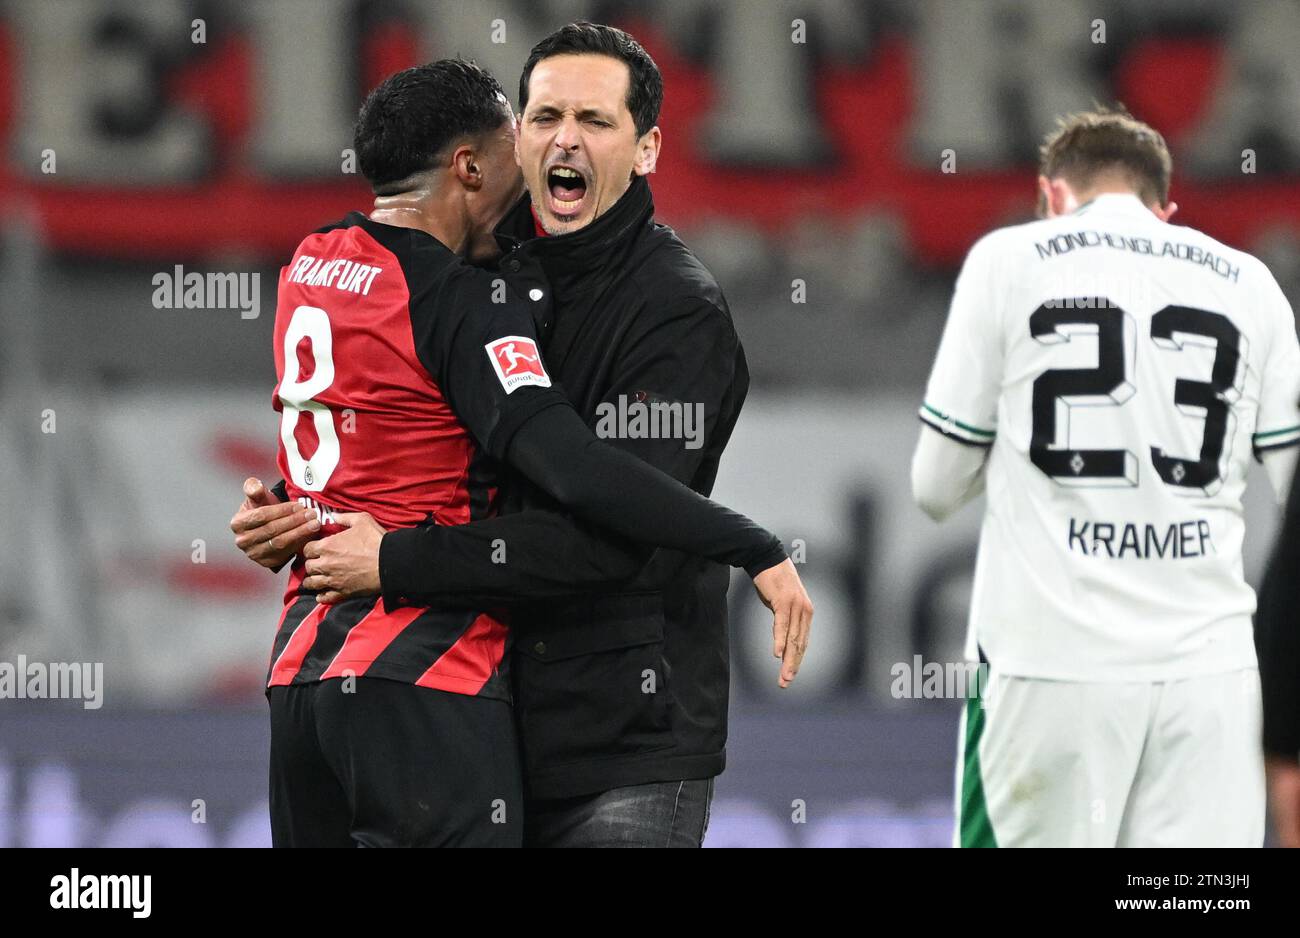 20 December 2023, Hesse, Frankfurt/Main: Soccer: Bundesliga, Eintracht Frankfurt - Borussia Mönchengladbach, matchday 16, at Deutsche Bank Park. Frankfurt's head coach Dino Toppmöller (M) and Farès Chaibi (l) celebrate after the 2:1 victory next to Mönchengladbach's Christoph Kramer. Photo: Arne Dedert/dpa - IMPORTANT NOTE: In accordance with the regulations of the DFL German Football League and the DFB German Football Association, it is prohibited to utilize or have utilized photographs taken in the stadium and/or of the match in the form of sequential images and/or video-like photo series. Stock Photo